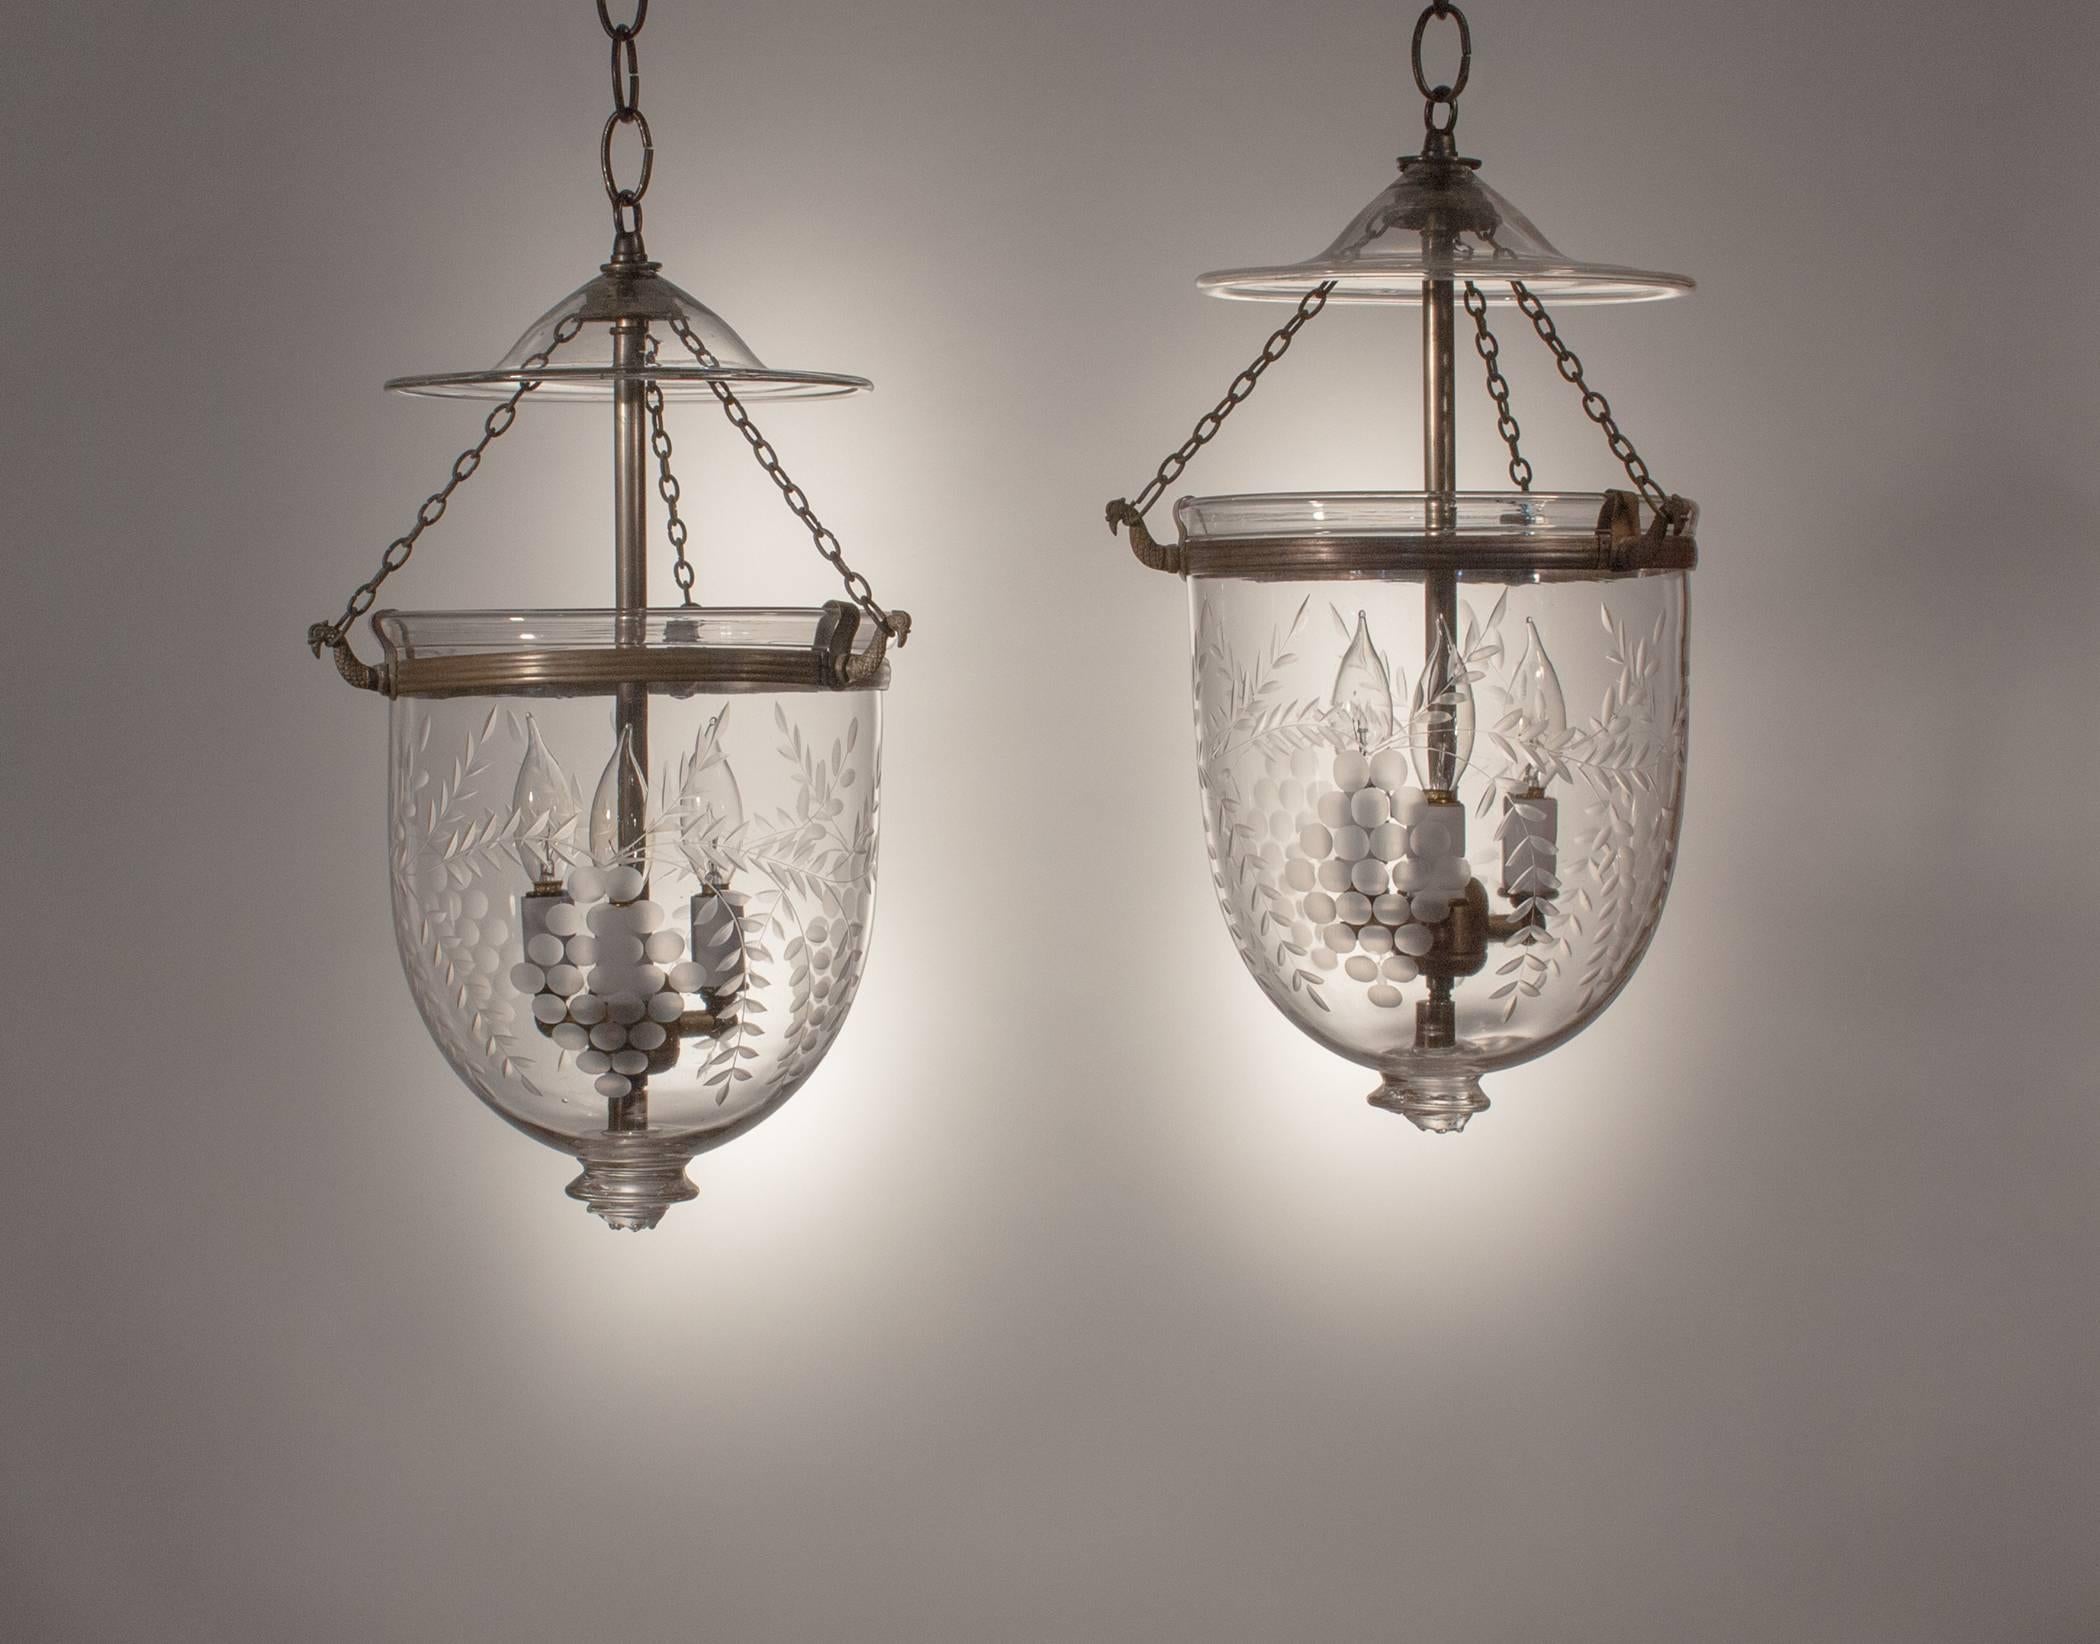 A lovely, well-matched pair of antique bell jar lanterns from England. These circa 1870 pendants boast excellent quality handblown glass and a finely etched vine with grape design that suits the contours of the hall lanterns nicely. The rolled brass